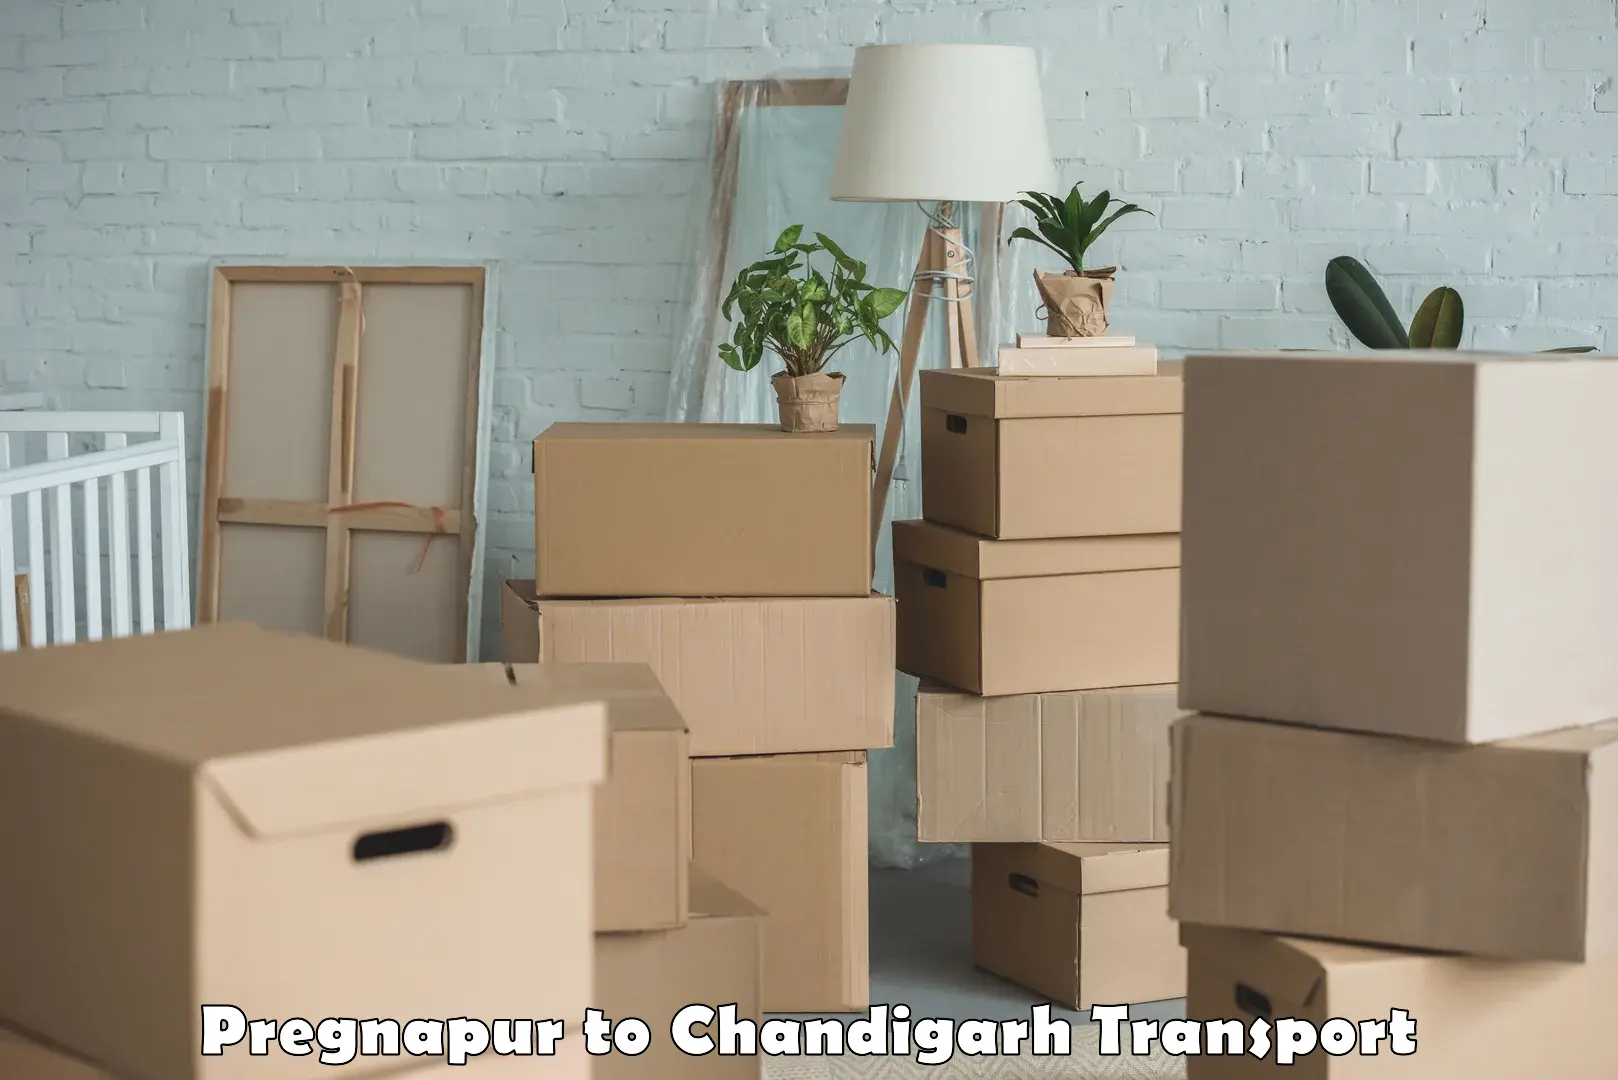 Part load transport service in India Pregnapur to Chandigarh